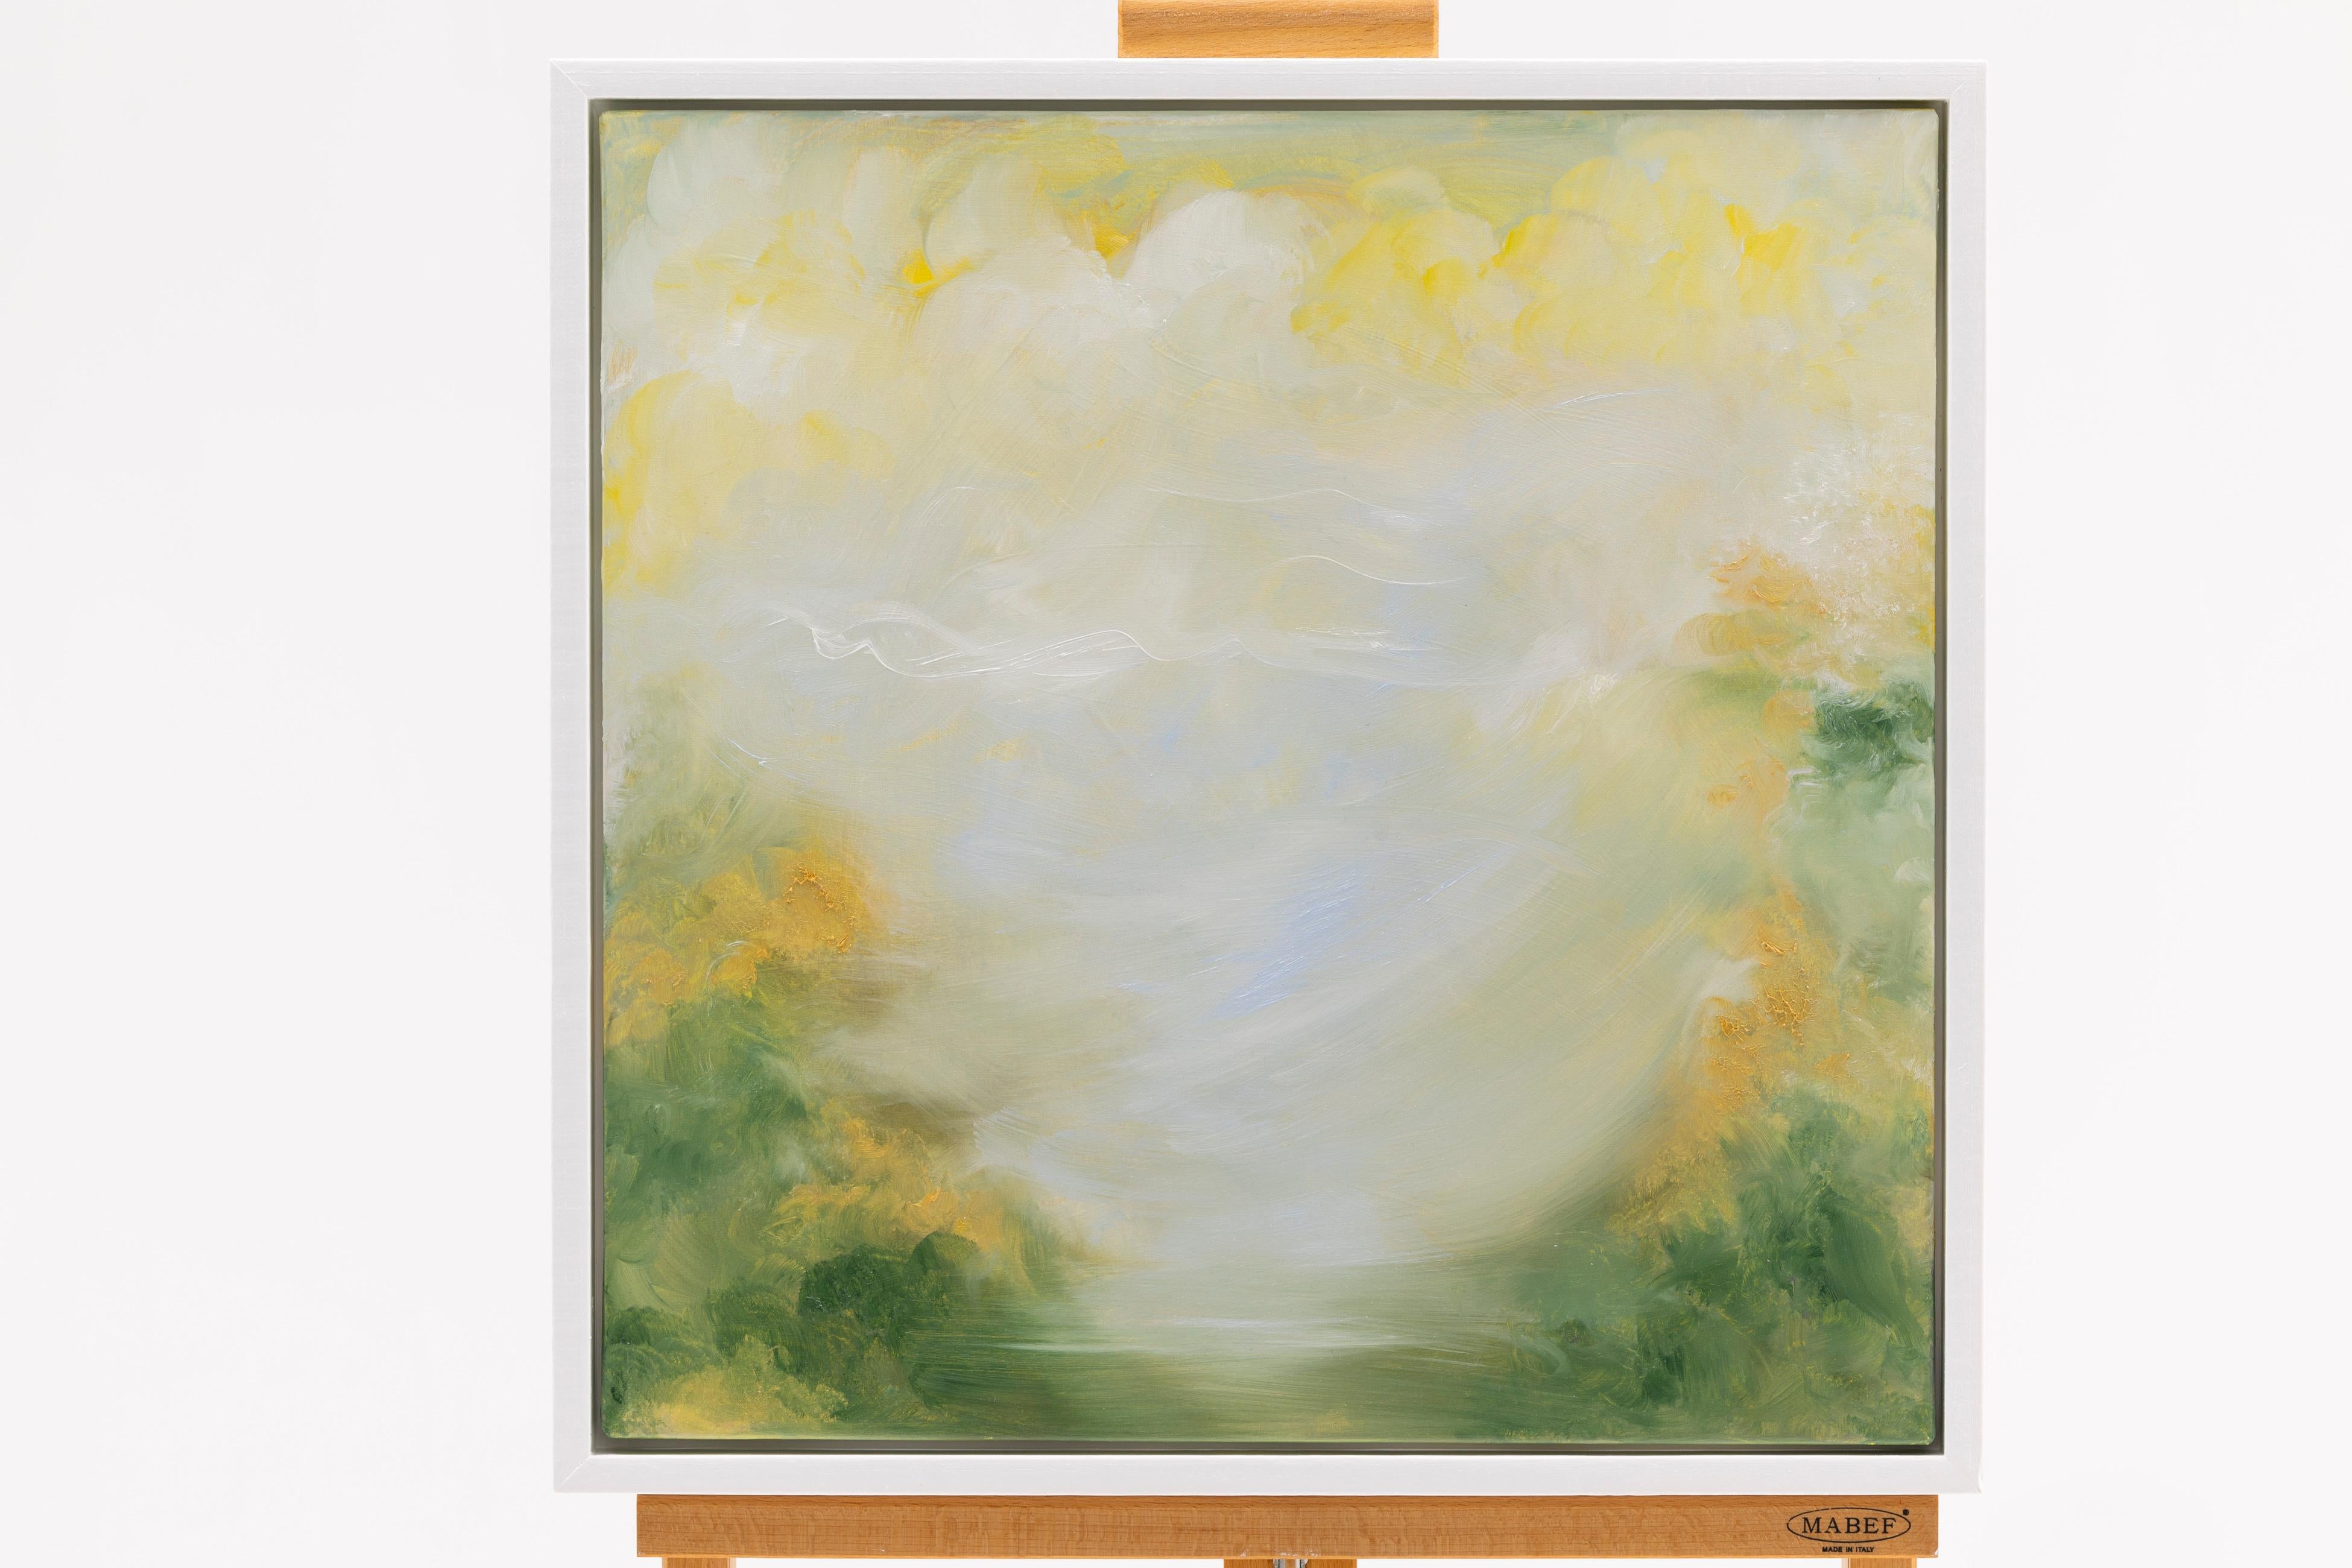 Born in spring - Soft green and gold abstract landscape painting - Painting by Jennifer L. Baker